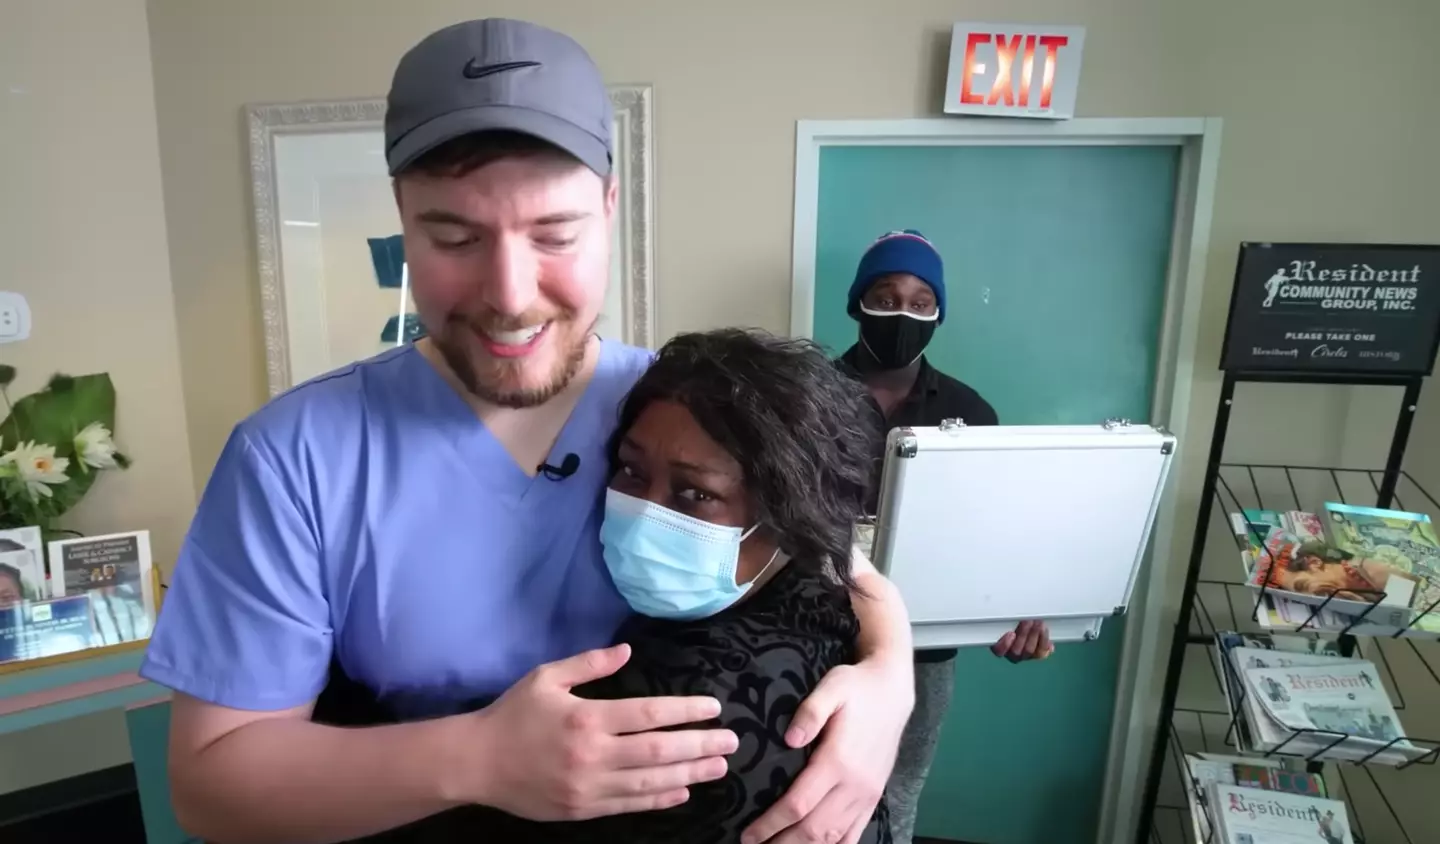 One woman was left totally overwhelmed by the YouTuber's kindness.